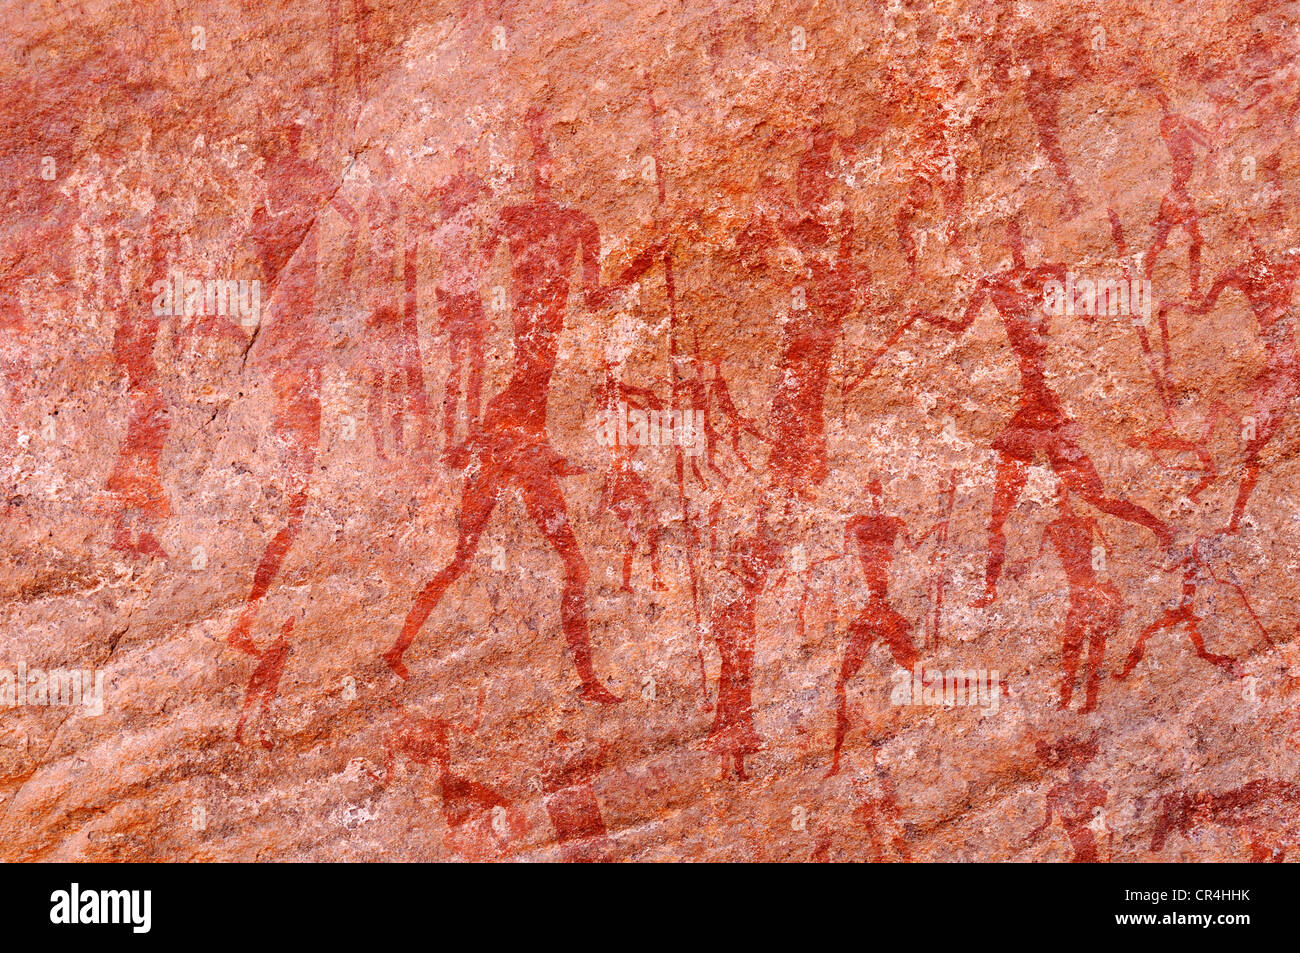 Painted people, neolithic rockart of the Acacus Mountains or Tadrart Acacus range, Tassili n'Ajjer National Park Stock Photo